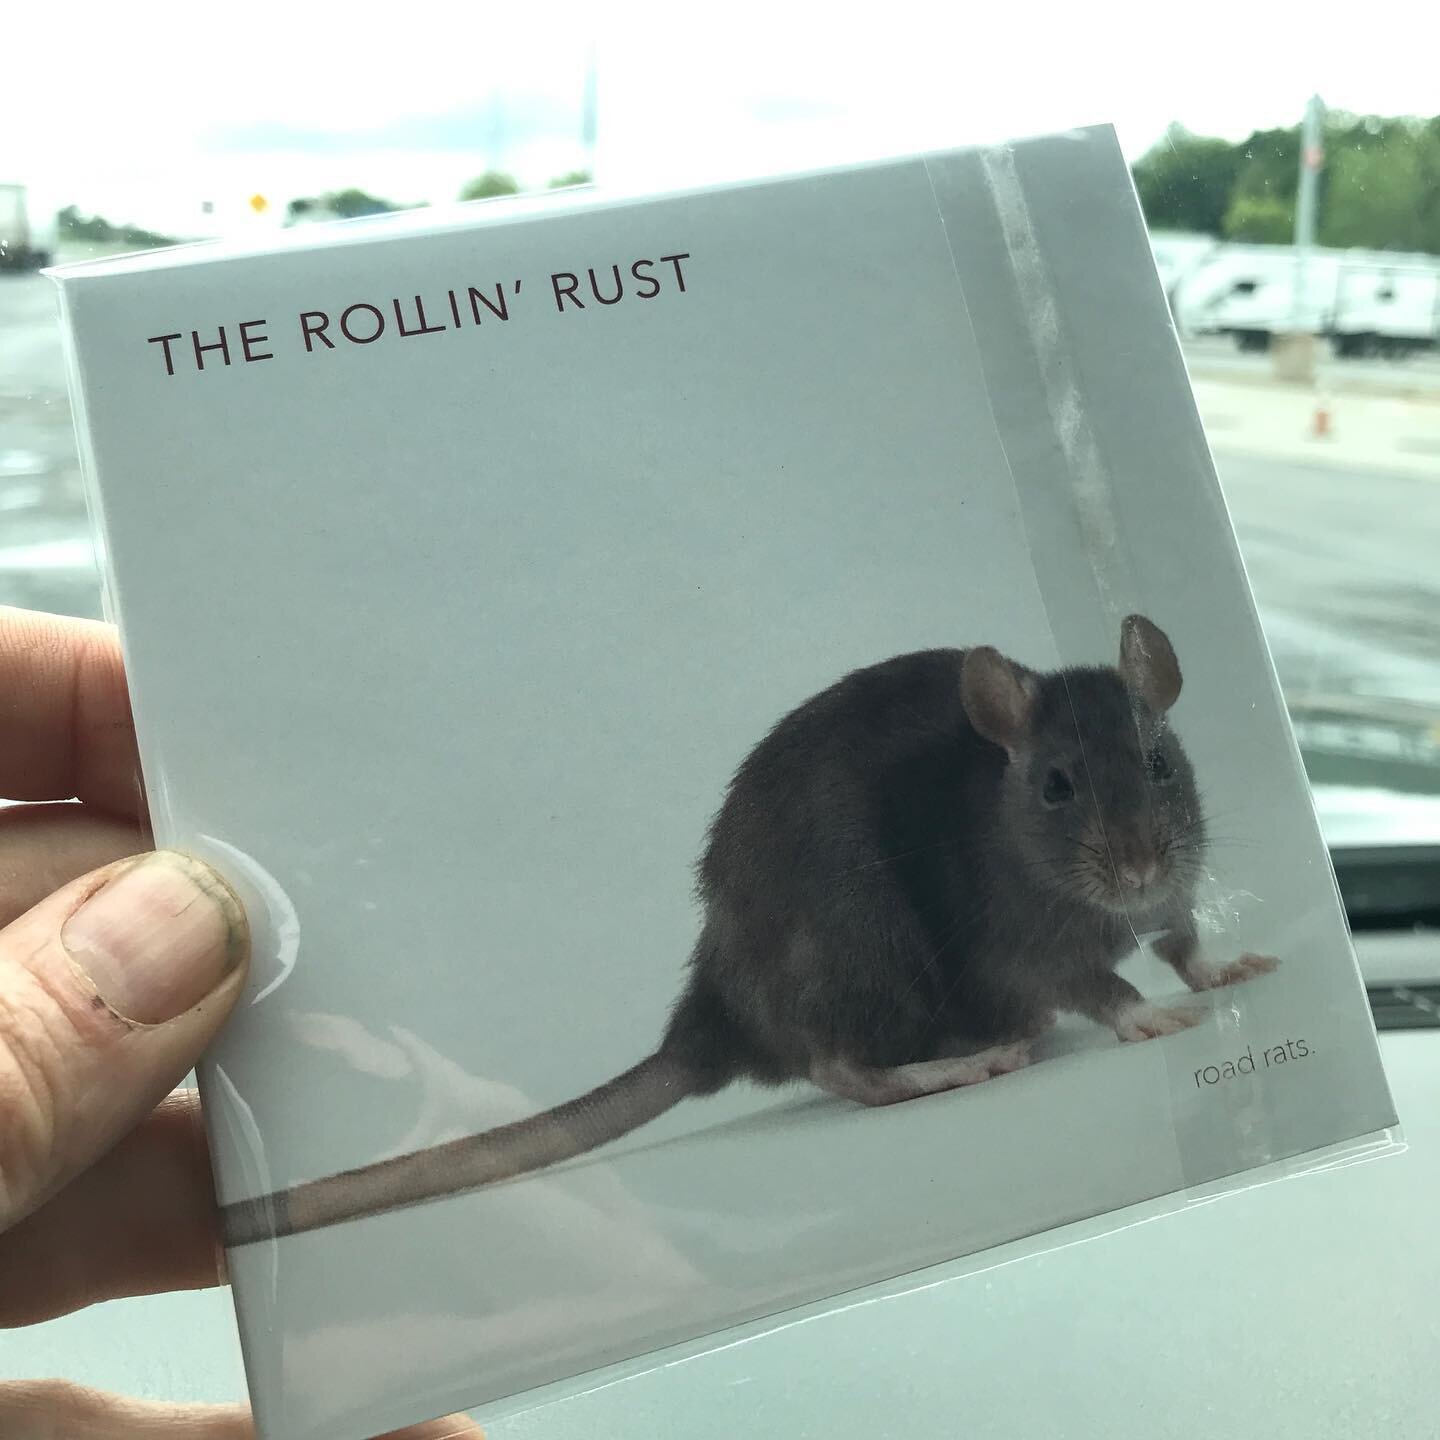 I had a great time in Vermont last week. Traveled up to work on some slate pieces for a hearth and a couple benches, then hauled them back to Indiana.

1. @therollinrustband s new album Road Rats was my soundtrack for the week. I joined their Kicksta